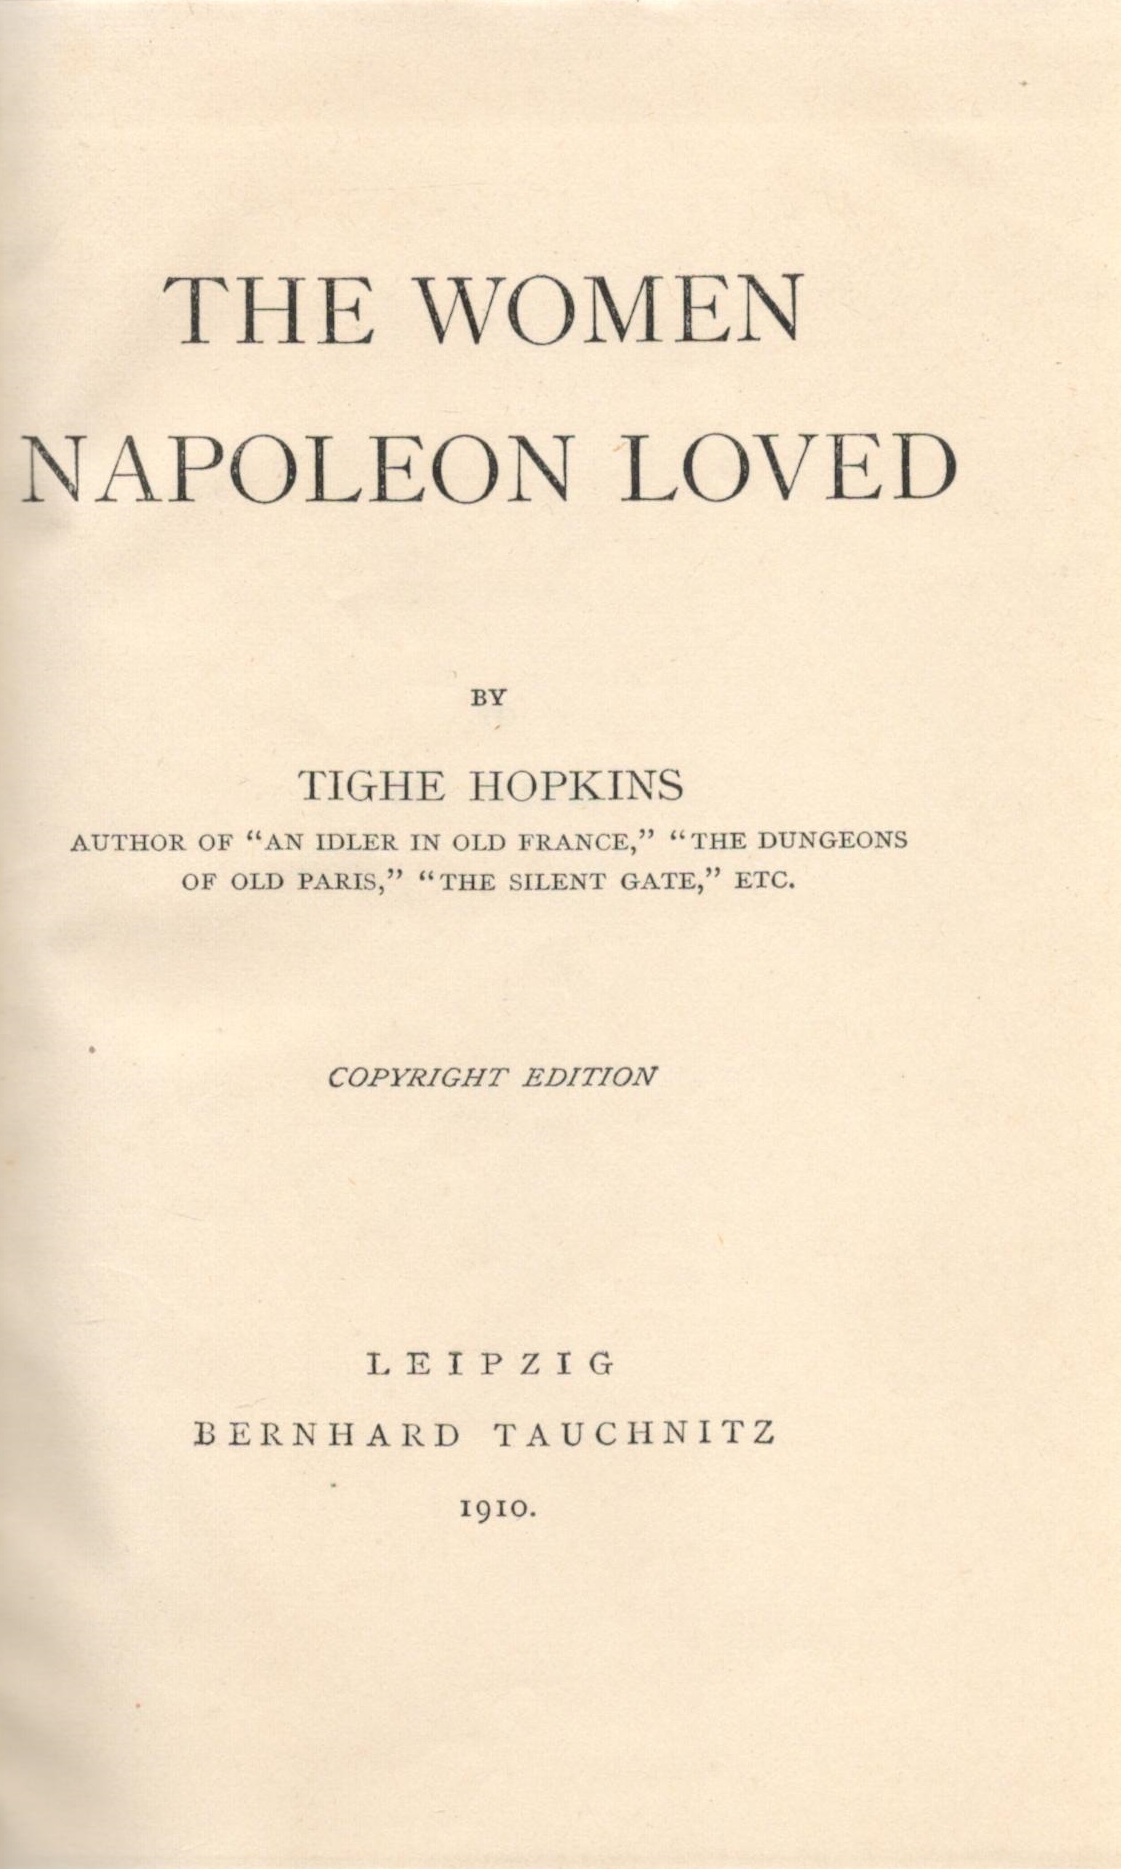 The Women Napoleon Loved by Tighe Hopkins Hardback Book 1910 Tauchnitz Edition published by - Image 2 of 2